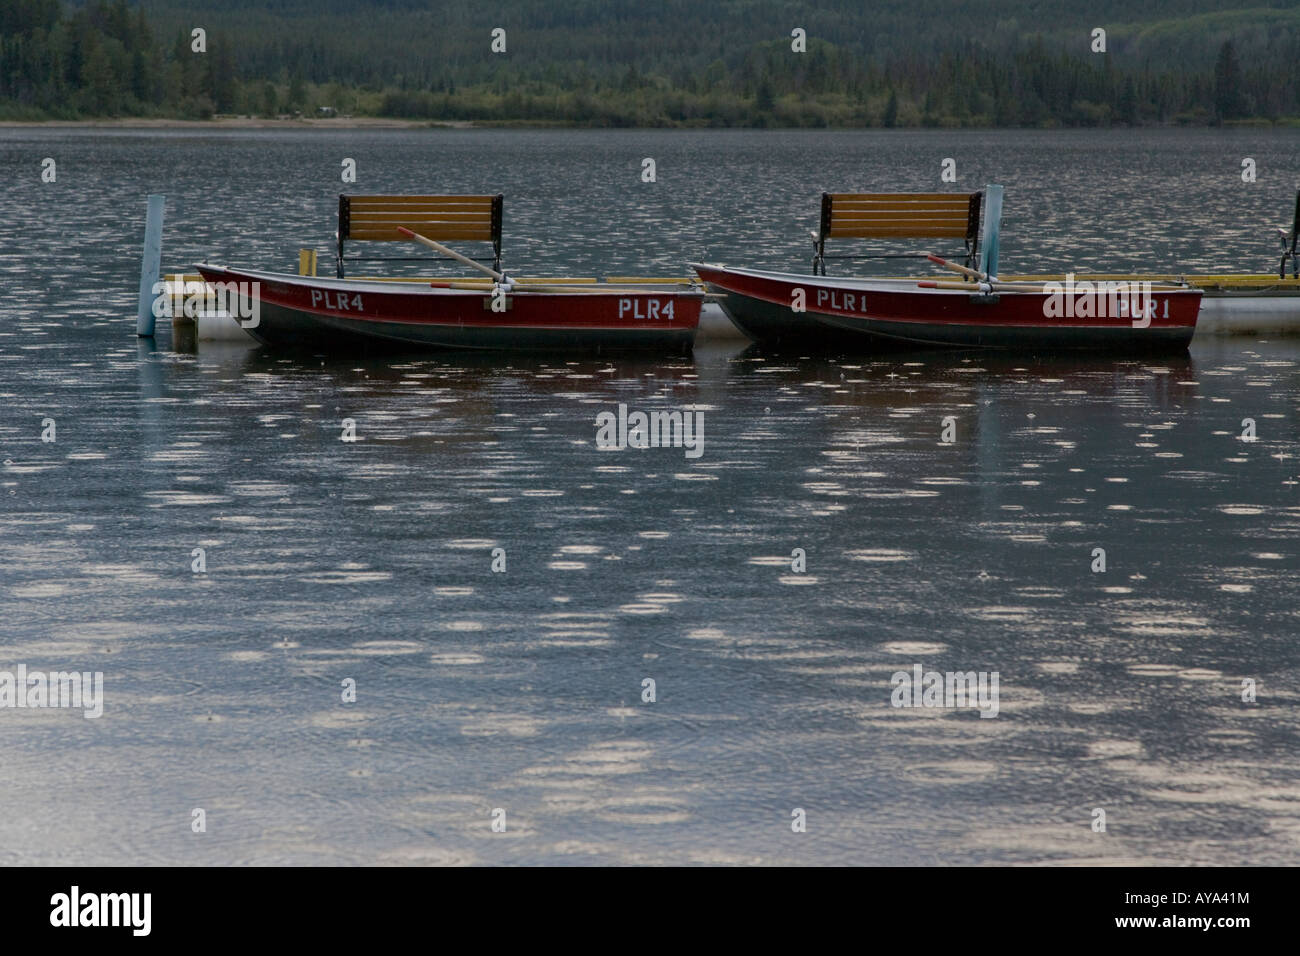 Gentle light and raindrops on lake leading upto moored boats and benches Stock Photo